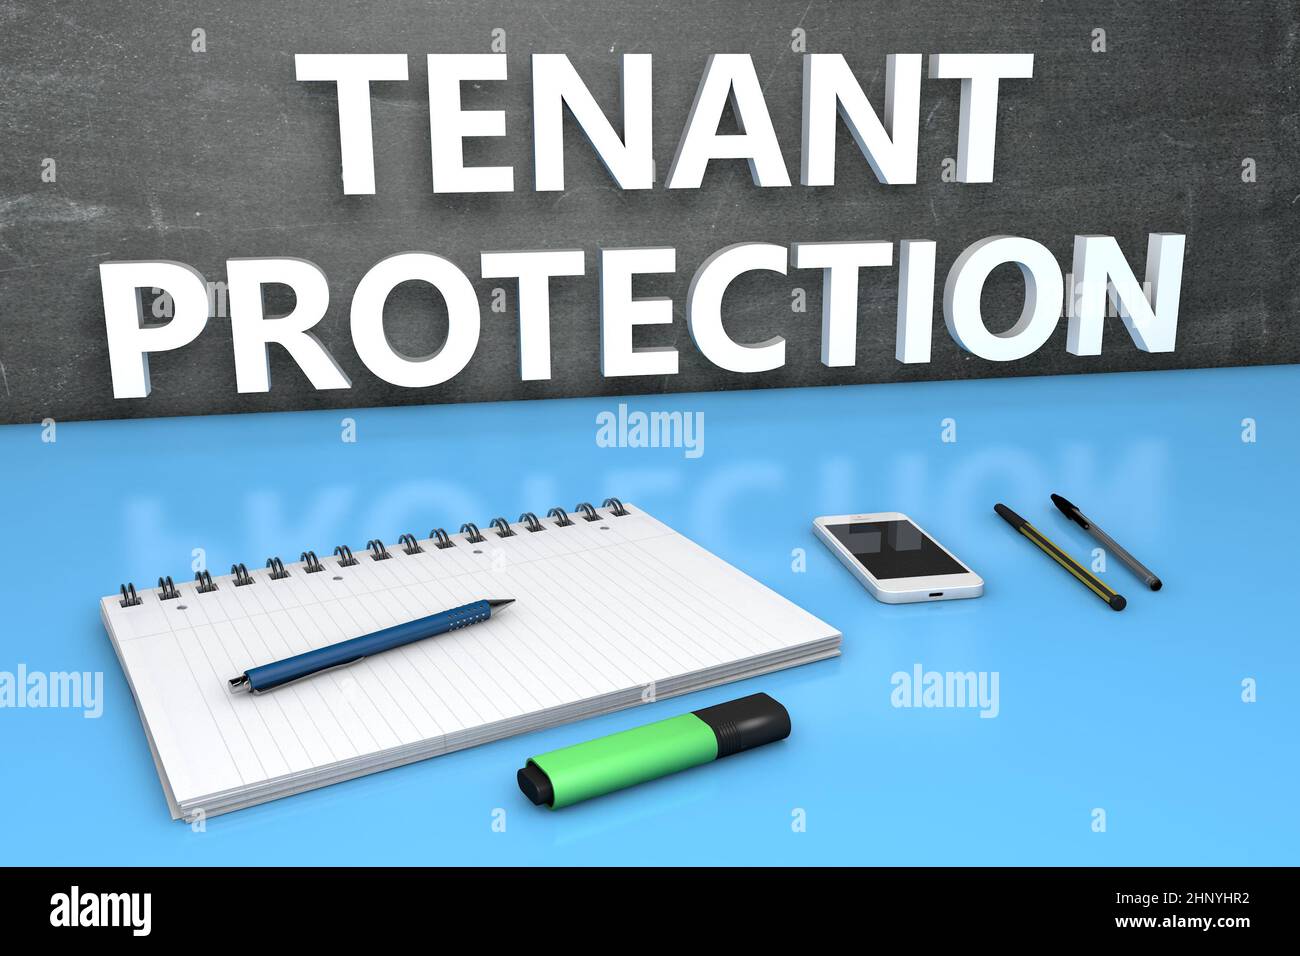 Tenant Protection - text concept with chalkboard, notebook, pens and mobile phone. 3D render illustration. Stock Photo